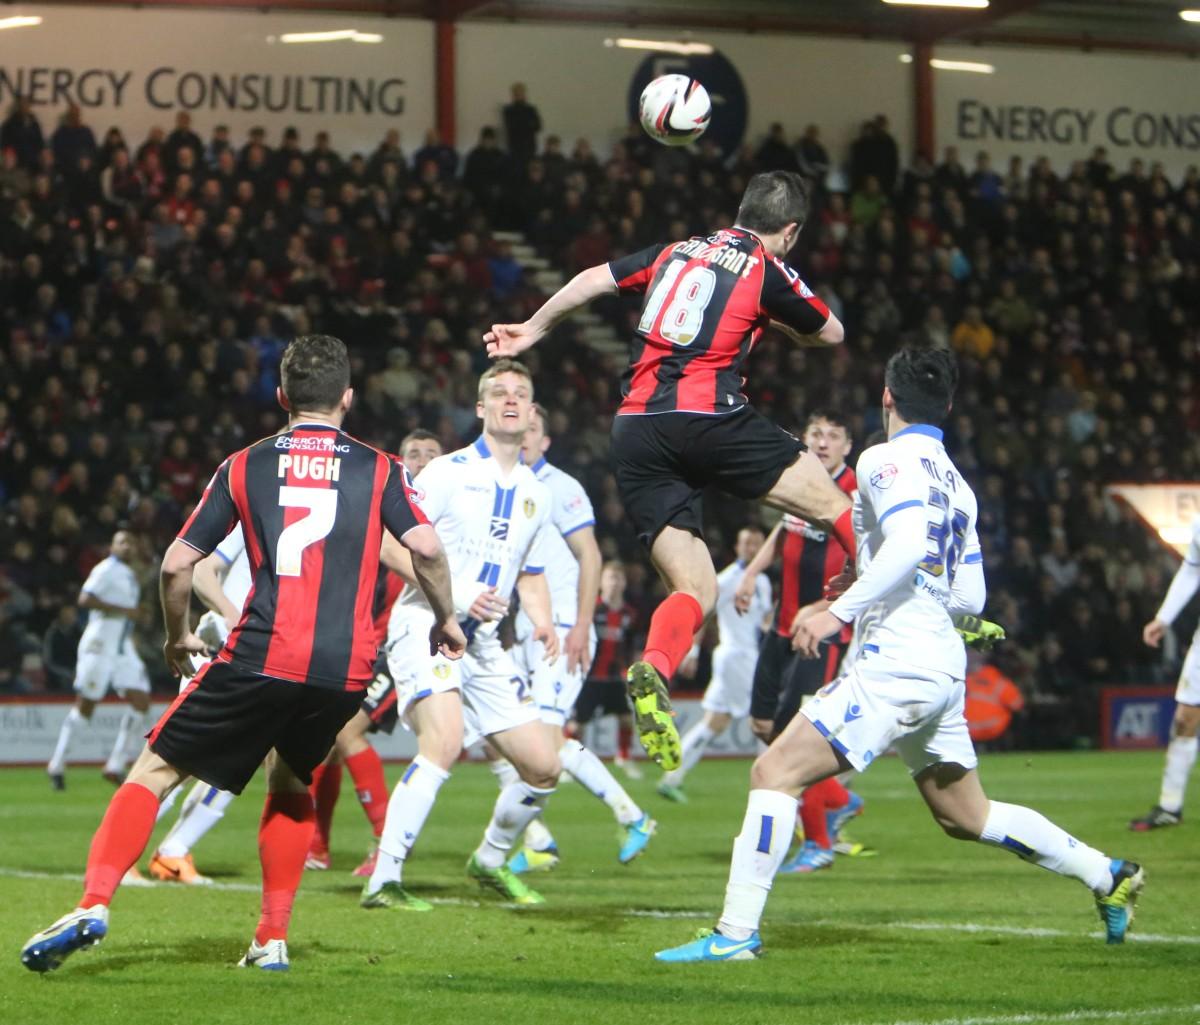 All our pictures from AFC Bournemouth v Leeds United an Dean Court on Tuesday, March 25, 2014.